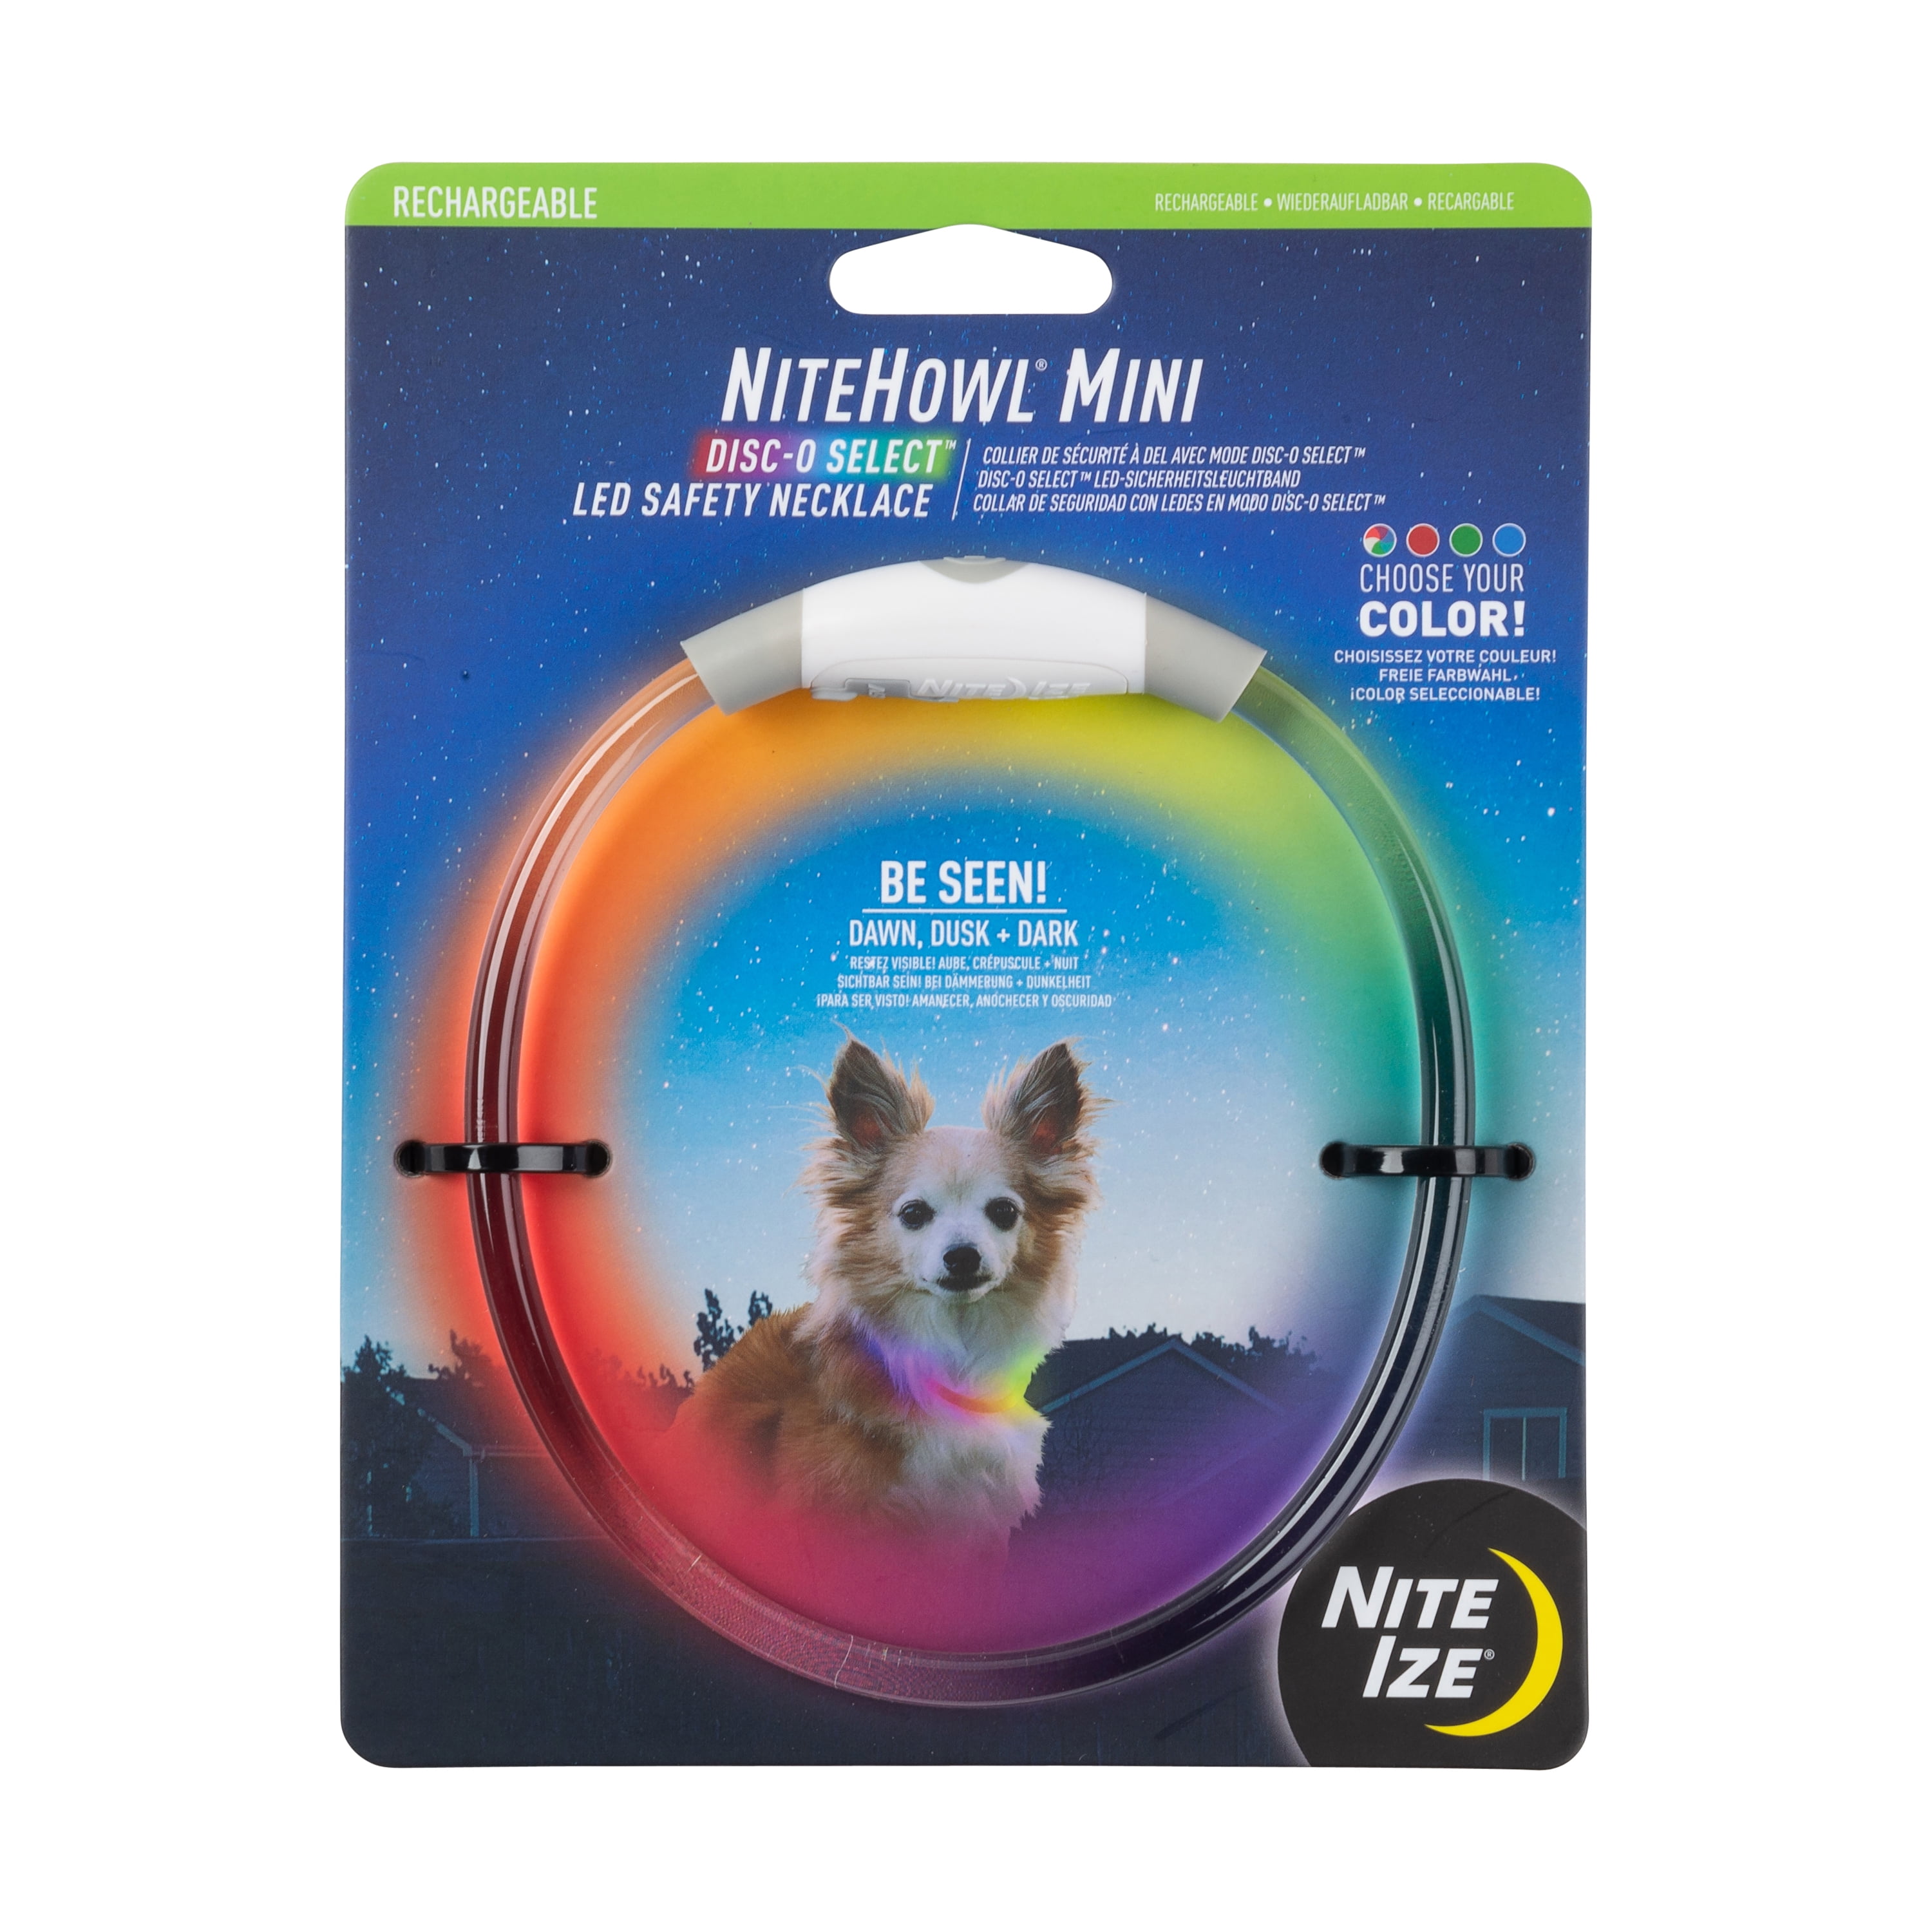 NiteHowl Mini Rechargeable LED Safety Dog Collar - Disc-O Select